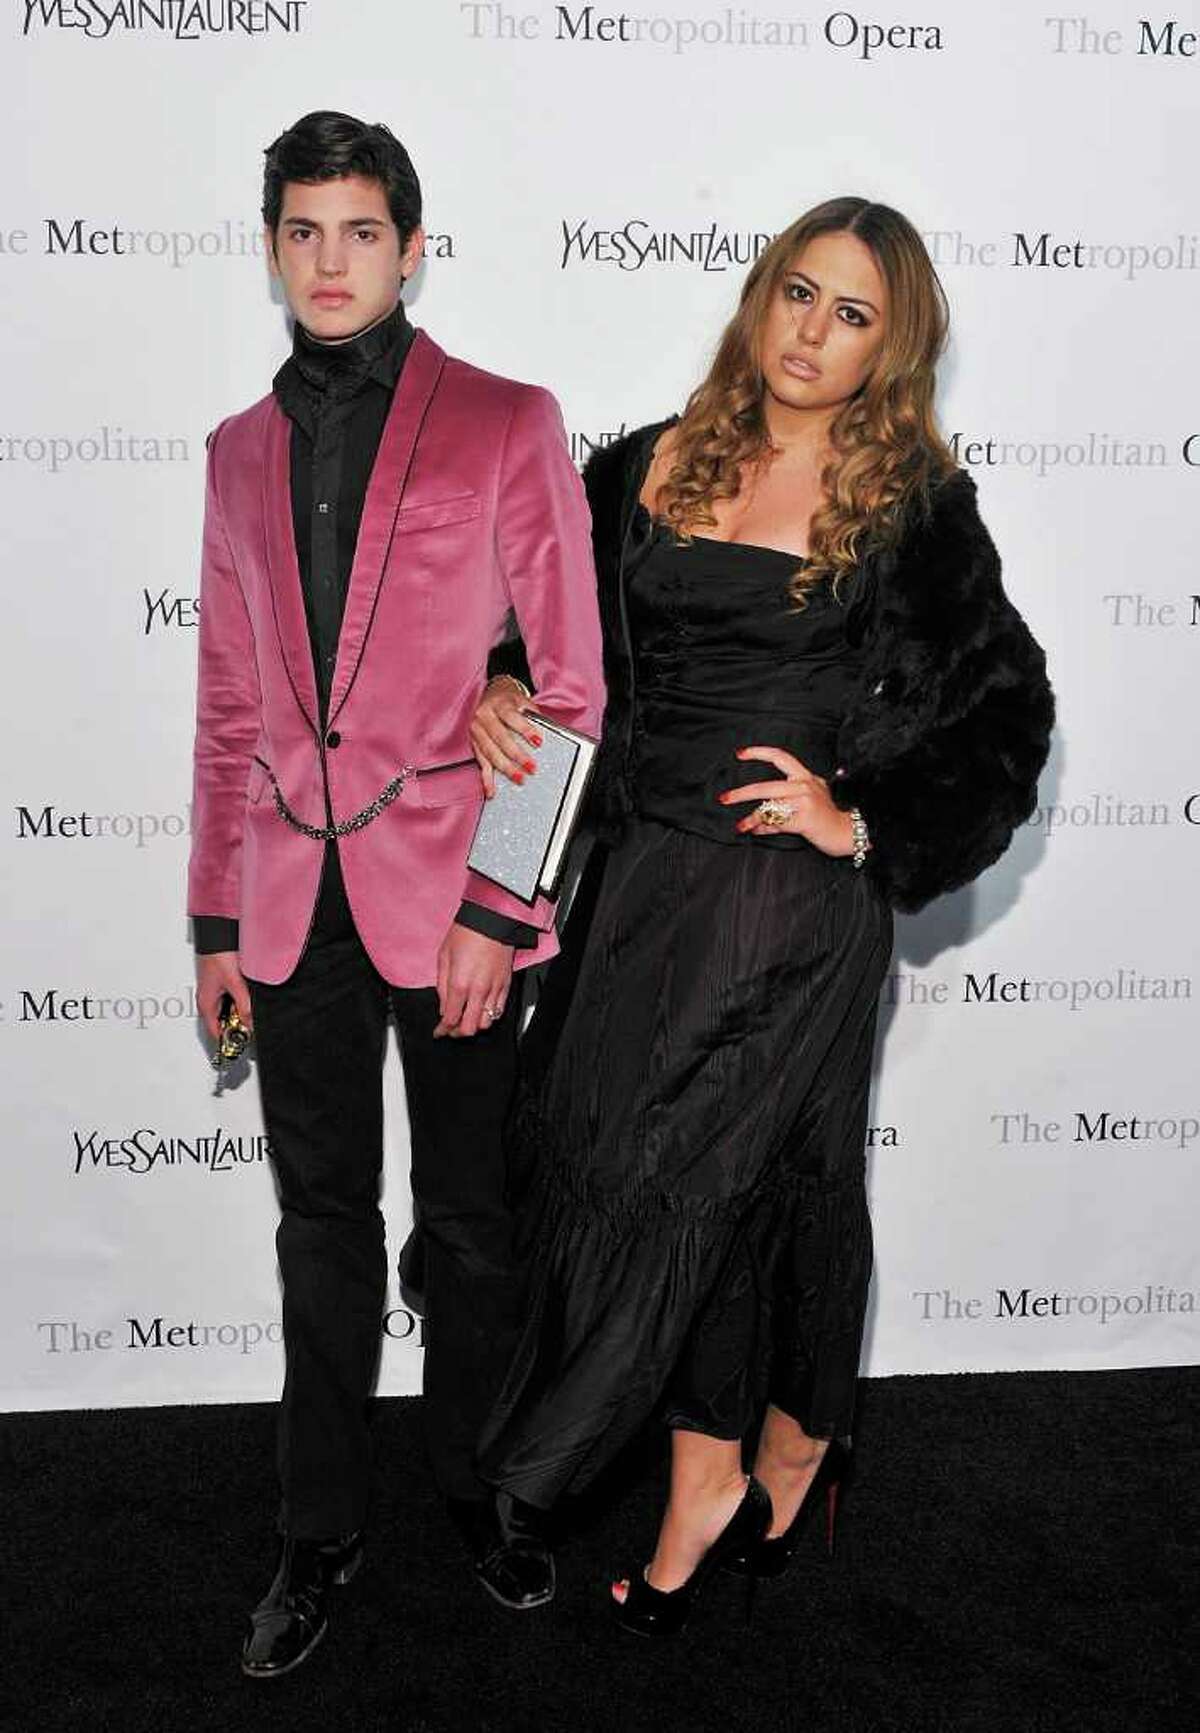 NEW YORK, NY - MARCH 24: Peter Brant Jr. (L) and Yvette Prieto attend the Metropolitan Opera's gala premiere of Rossini's "Le Comte Ory" at The Metropolitan Opera House on March 24, 2011 in New York City. (Photo by Mike Coppola/Getty Images) *** Local Caption *** Peter Brant Jr.;Yvette Prieto